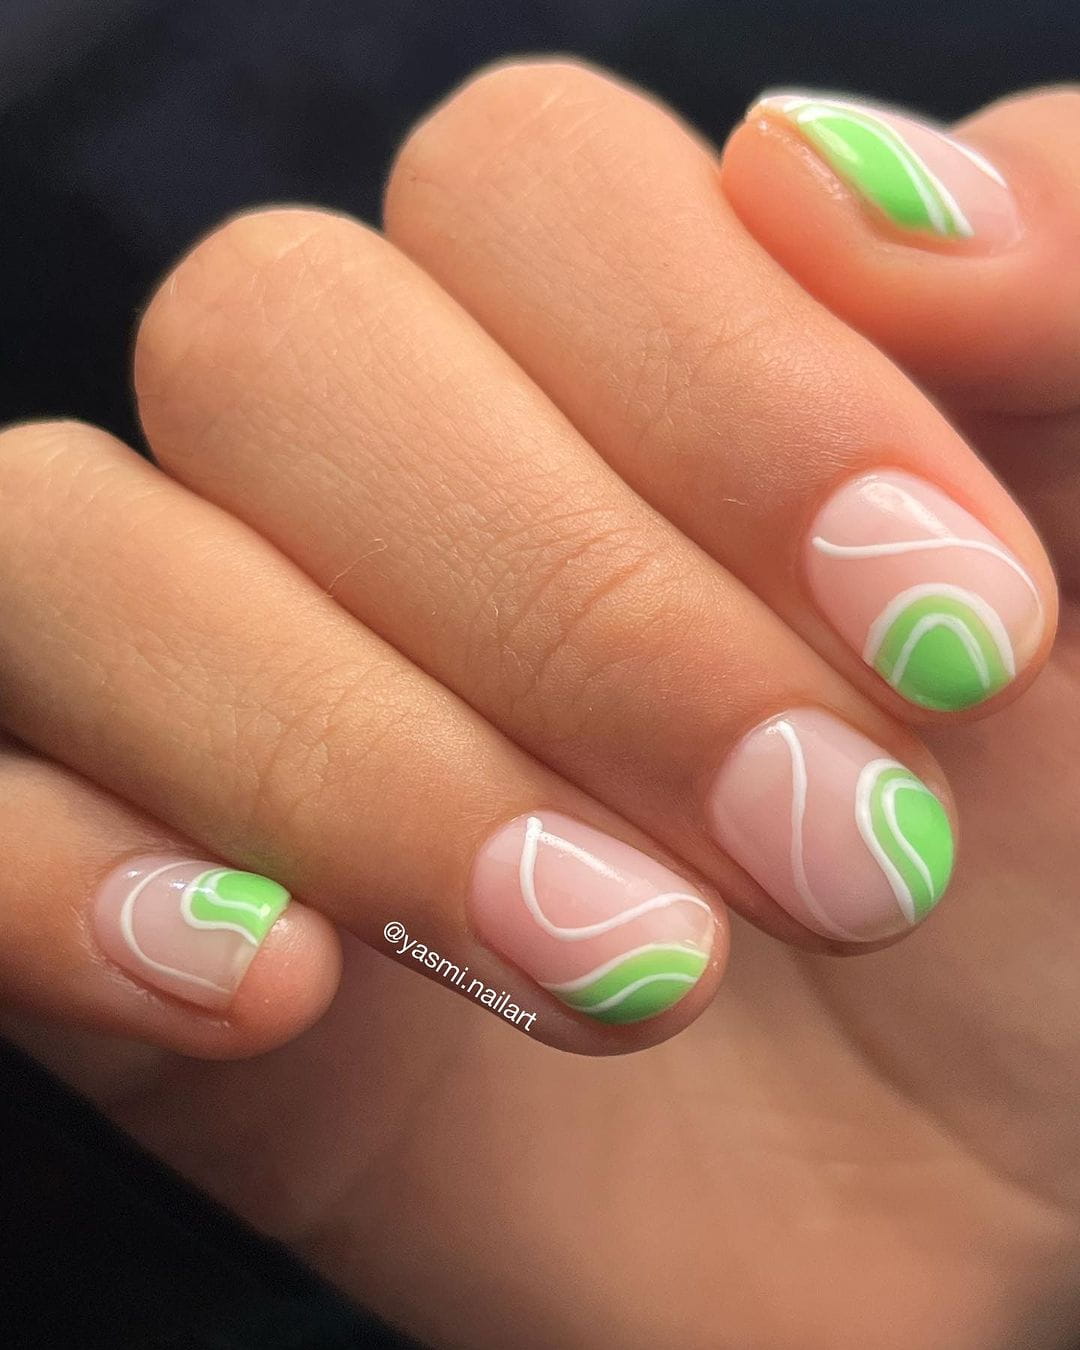 100 Pretty Spring Nail Designs To Try This Year images 58